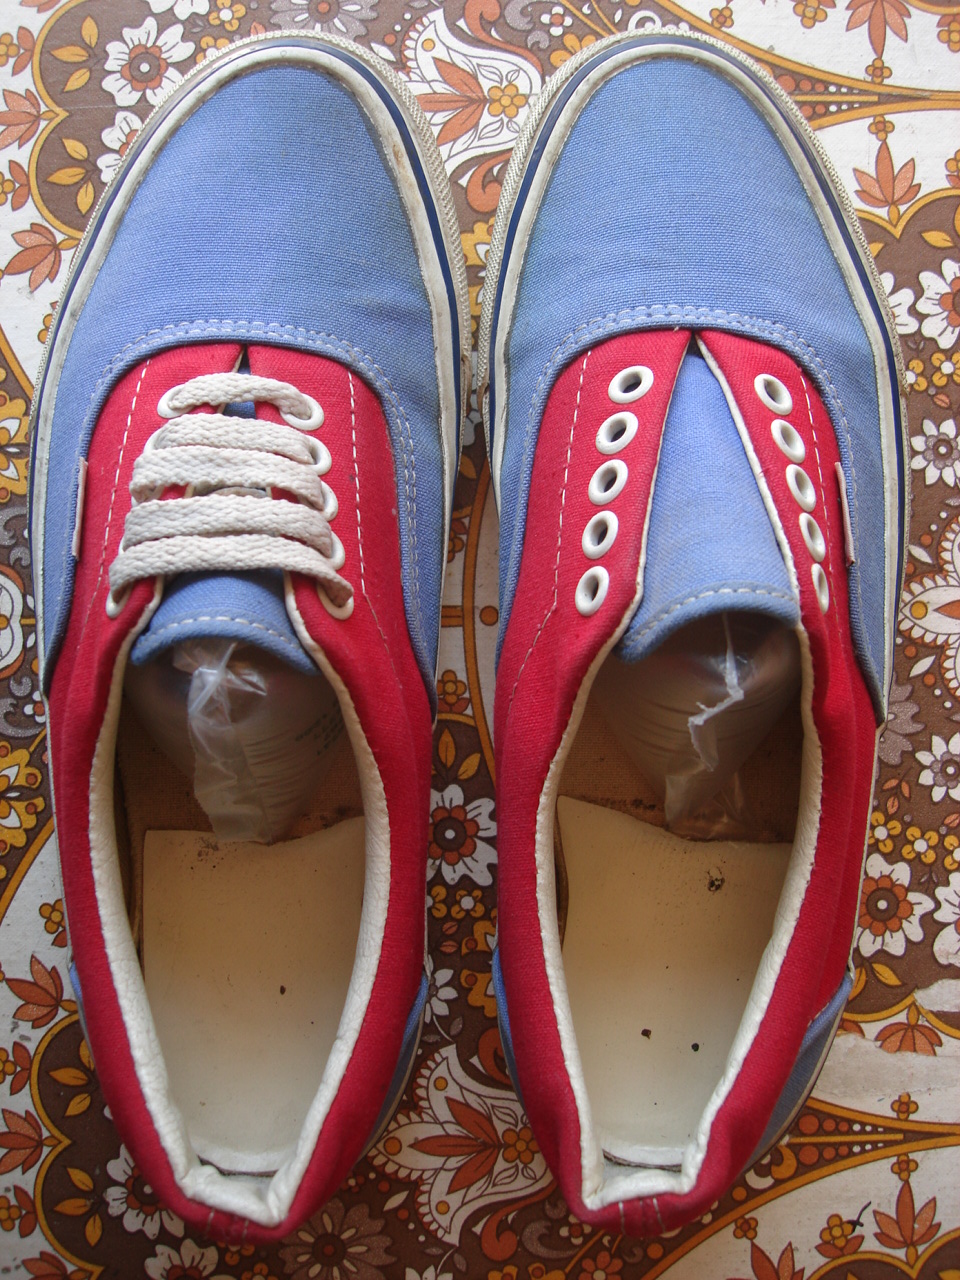 theothersideofthepillow: vintage VANS 2-tone lilac red canvas ERA style ...